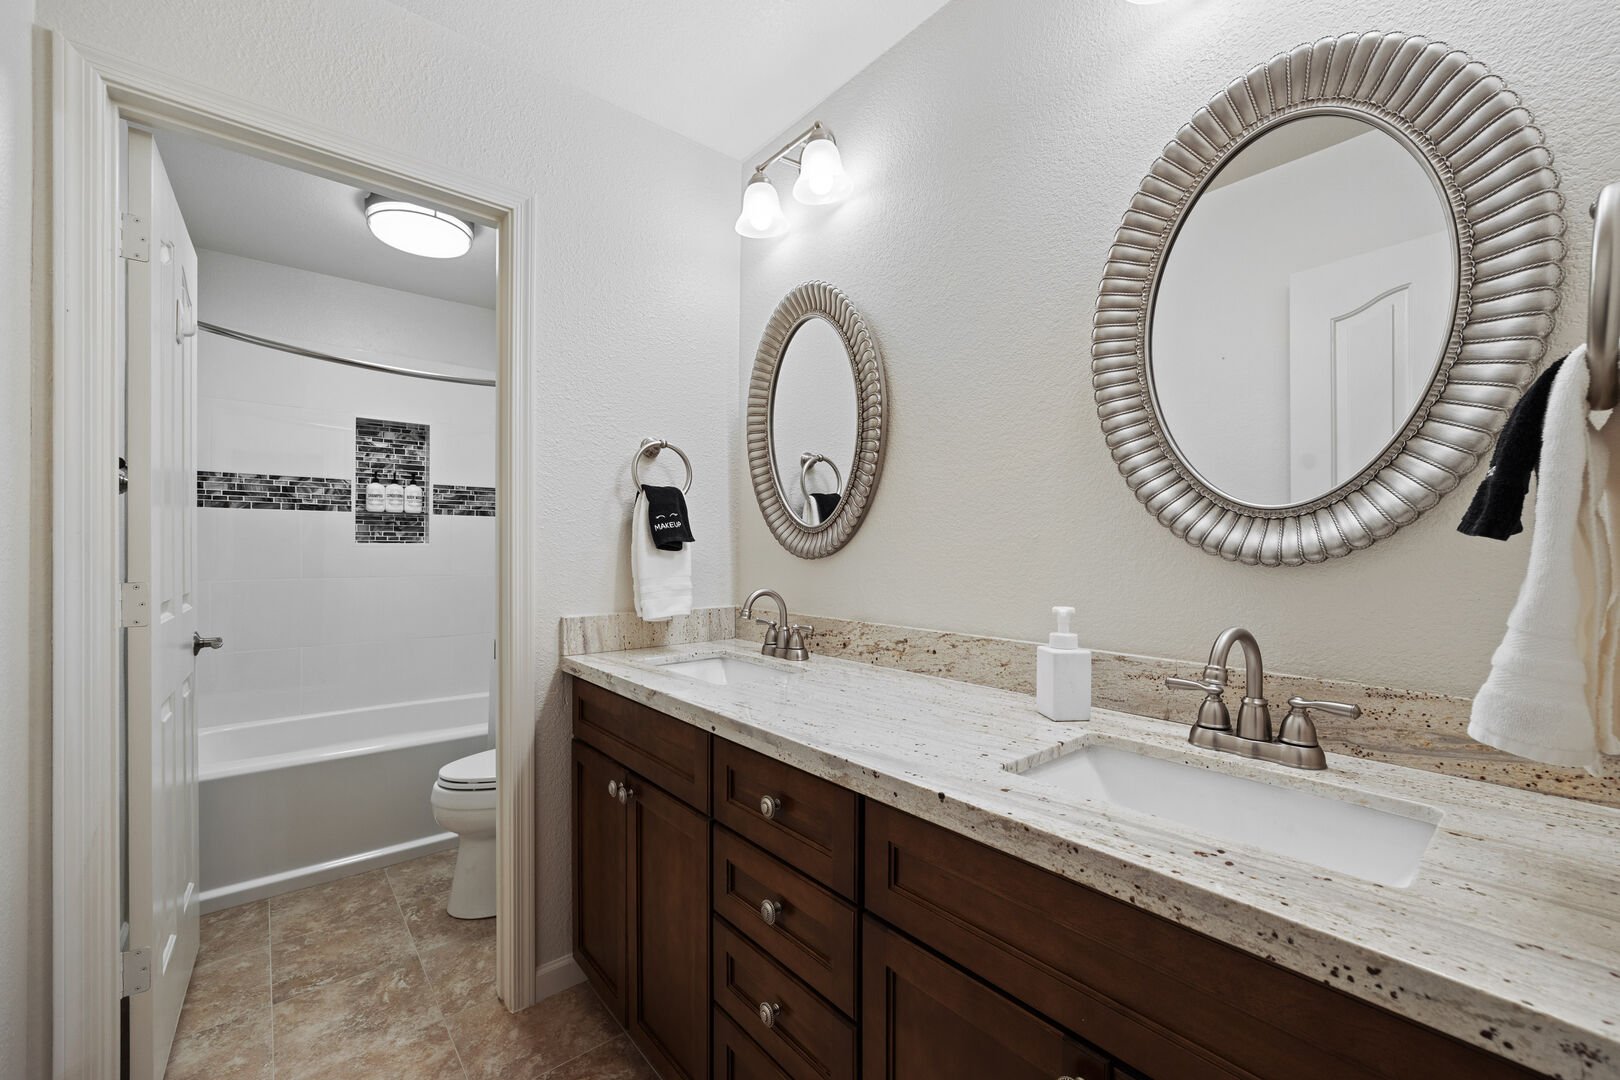 Shared bathroom with double vanity sinks and a shower/tub combo.